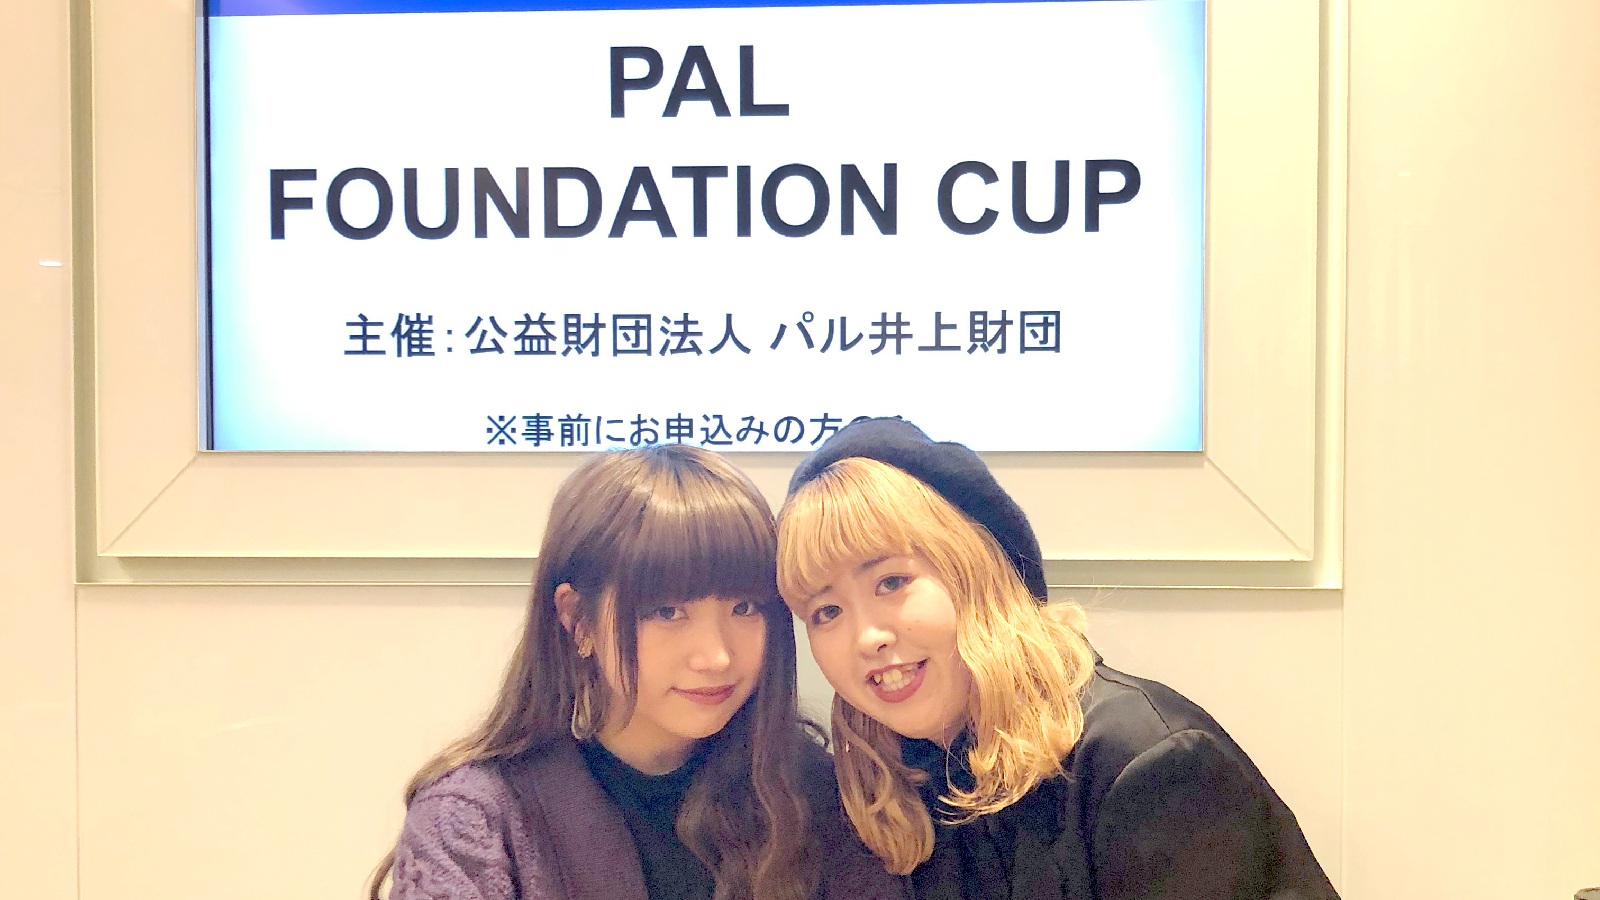 PAL FOUNDATION CUP 2019